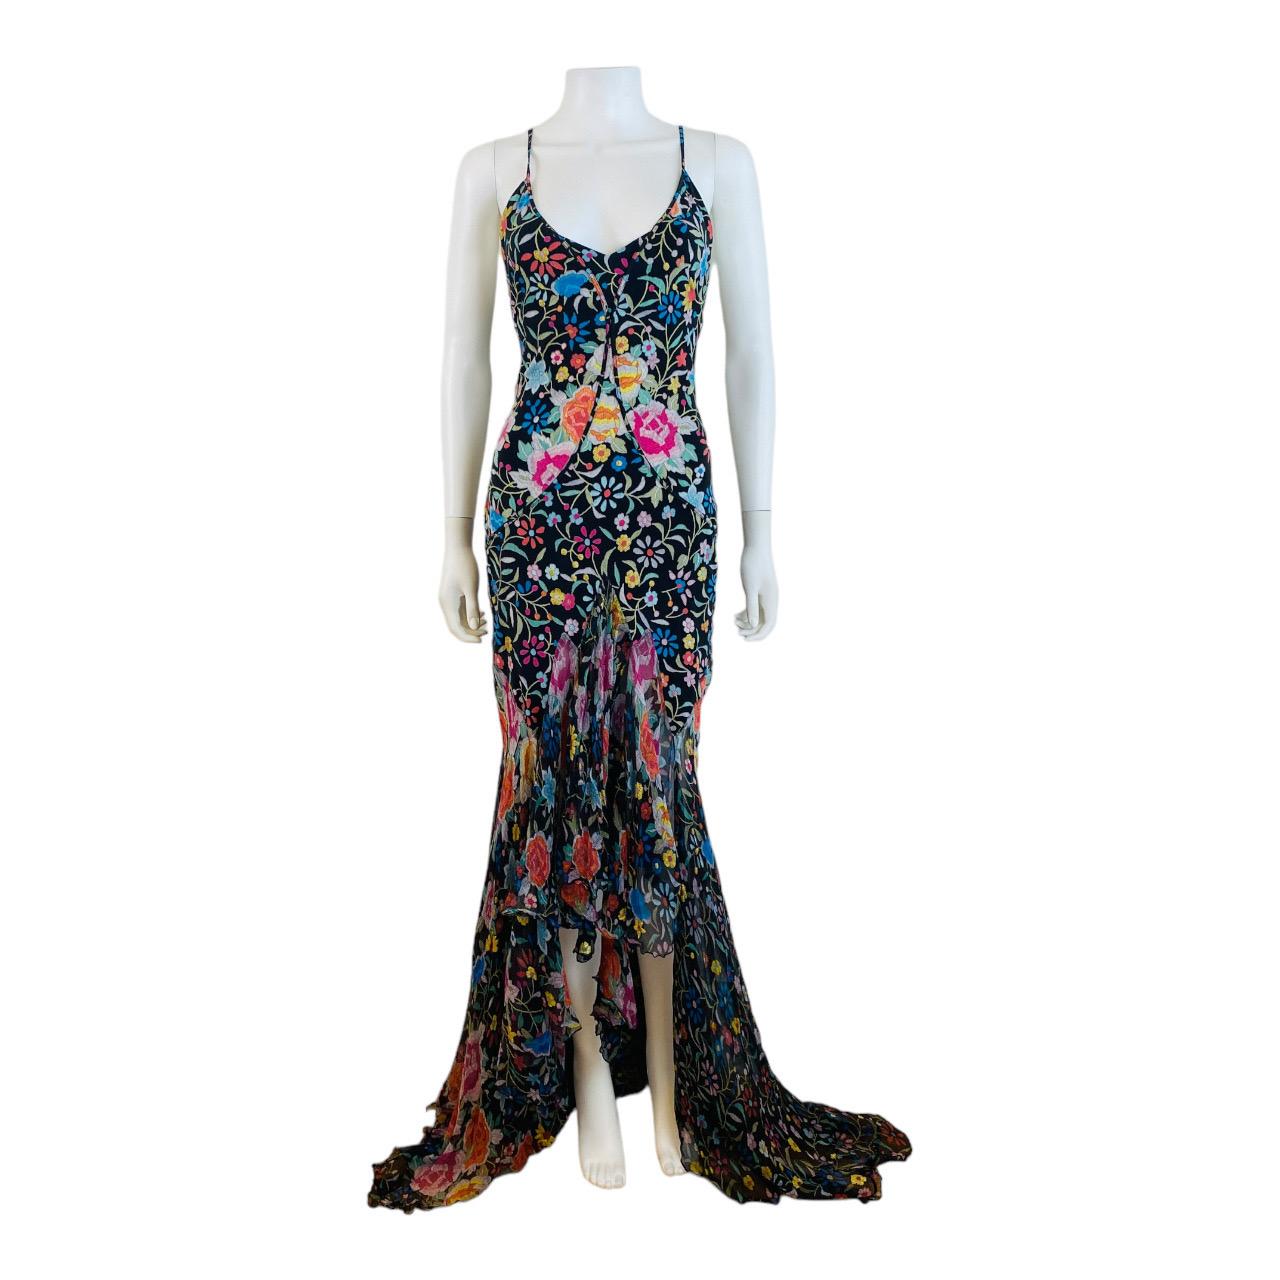 Women's Vintage Roberto Cavalli F/W 2004 Floral Embroidered Look Hi Lo Hem Dress Gown For Sale